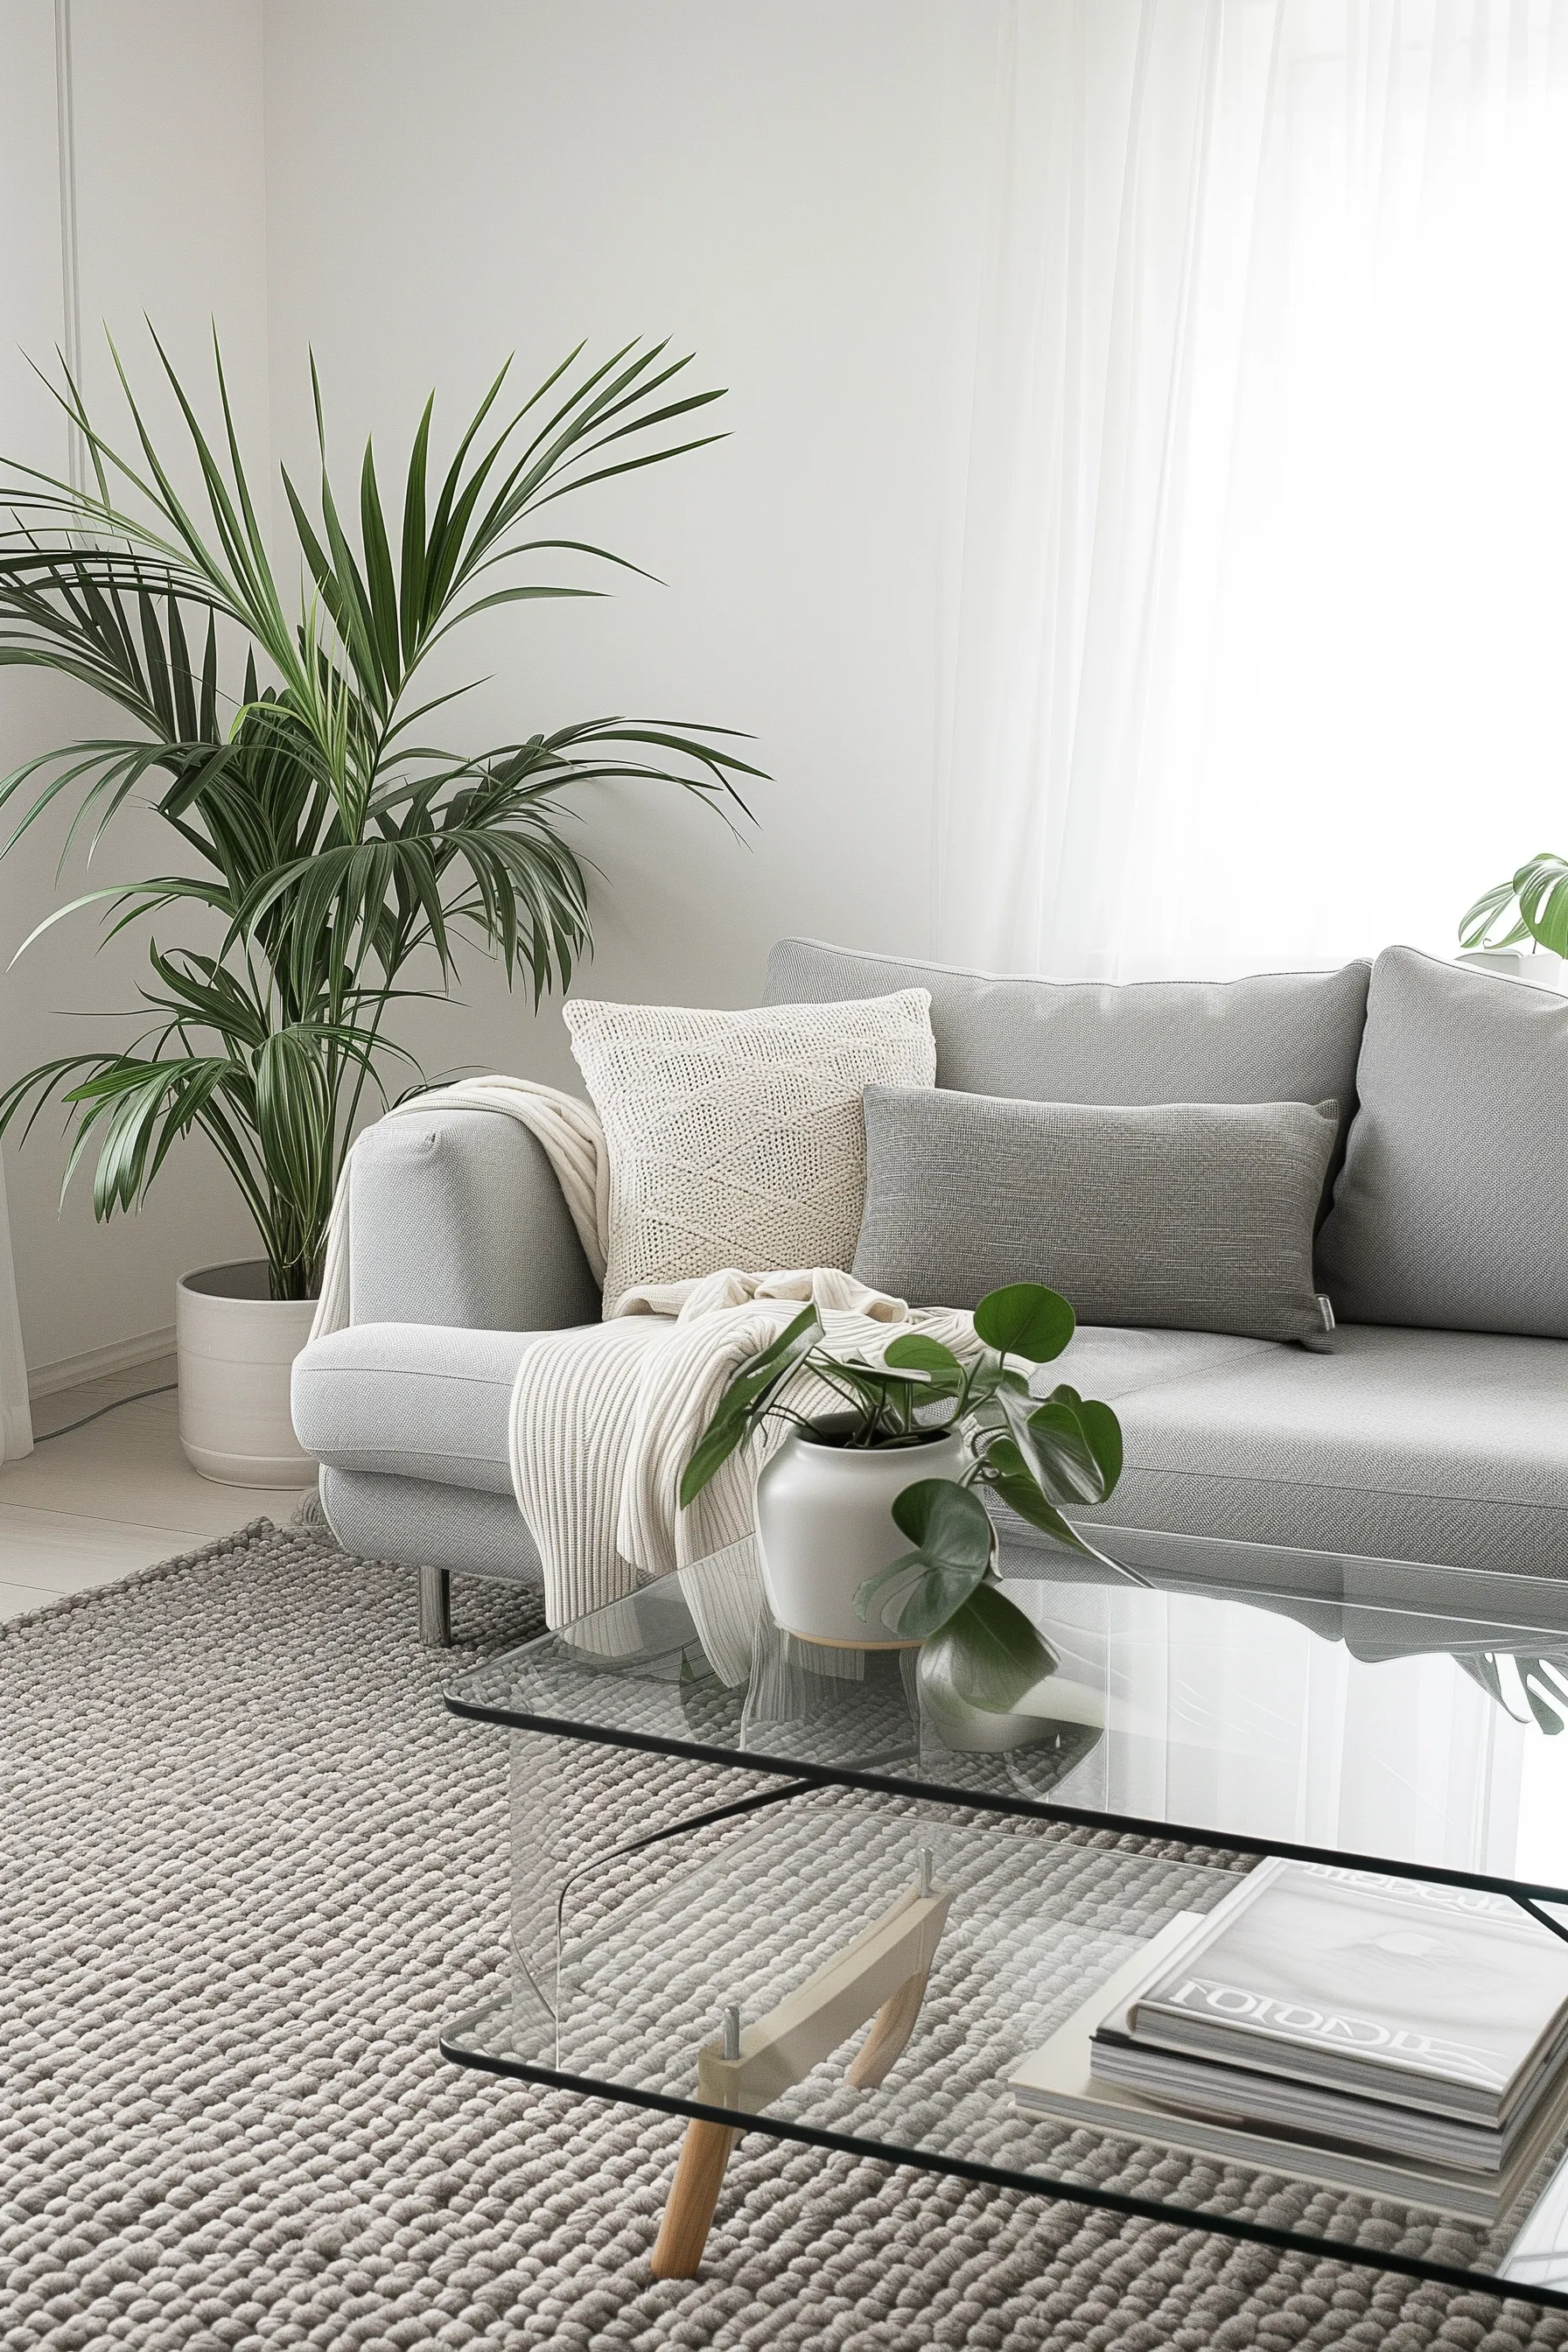 A living room with grey couch and a glass coffee table and plants and a knit rug